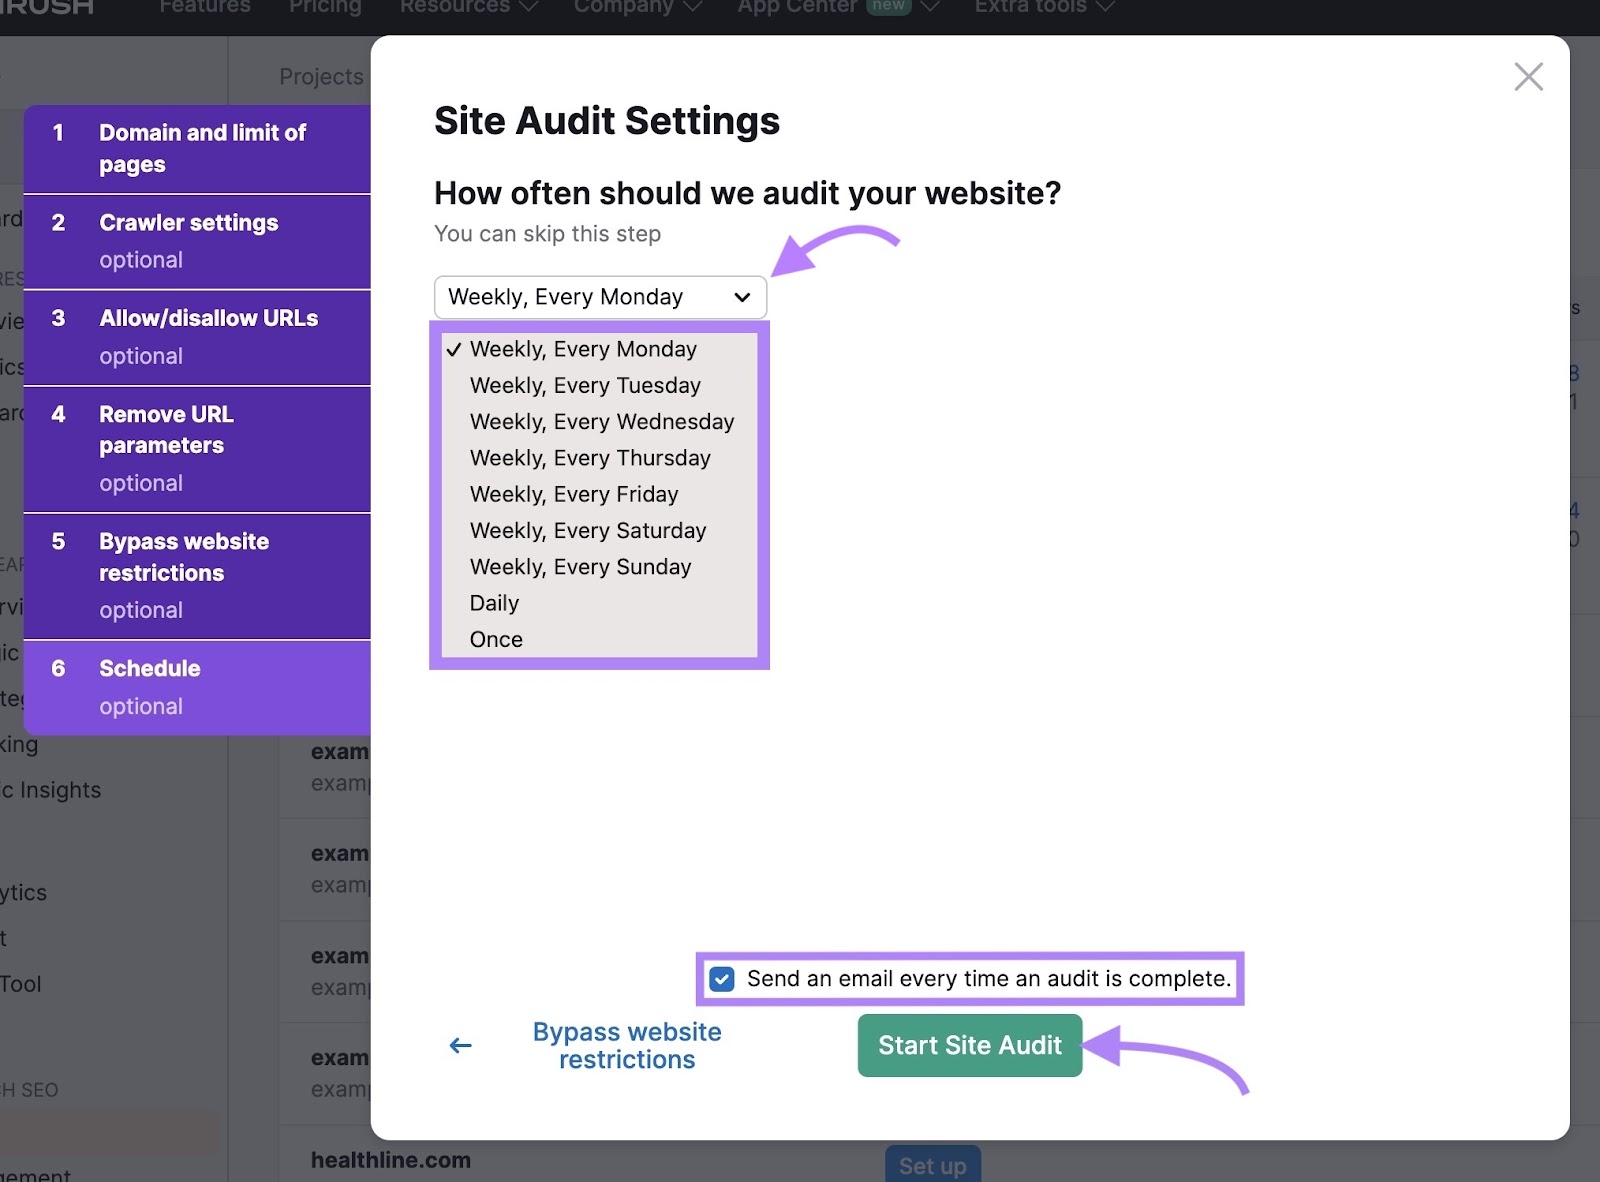 Scheduling options on Site Audit settings include daily, weekly, or once.